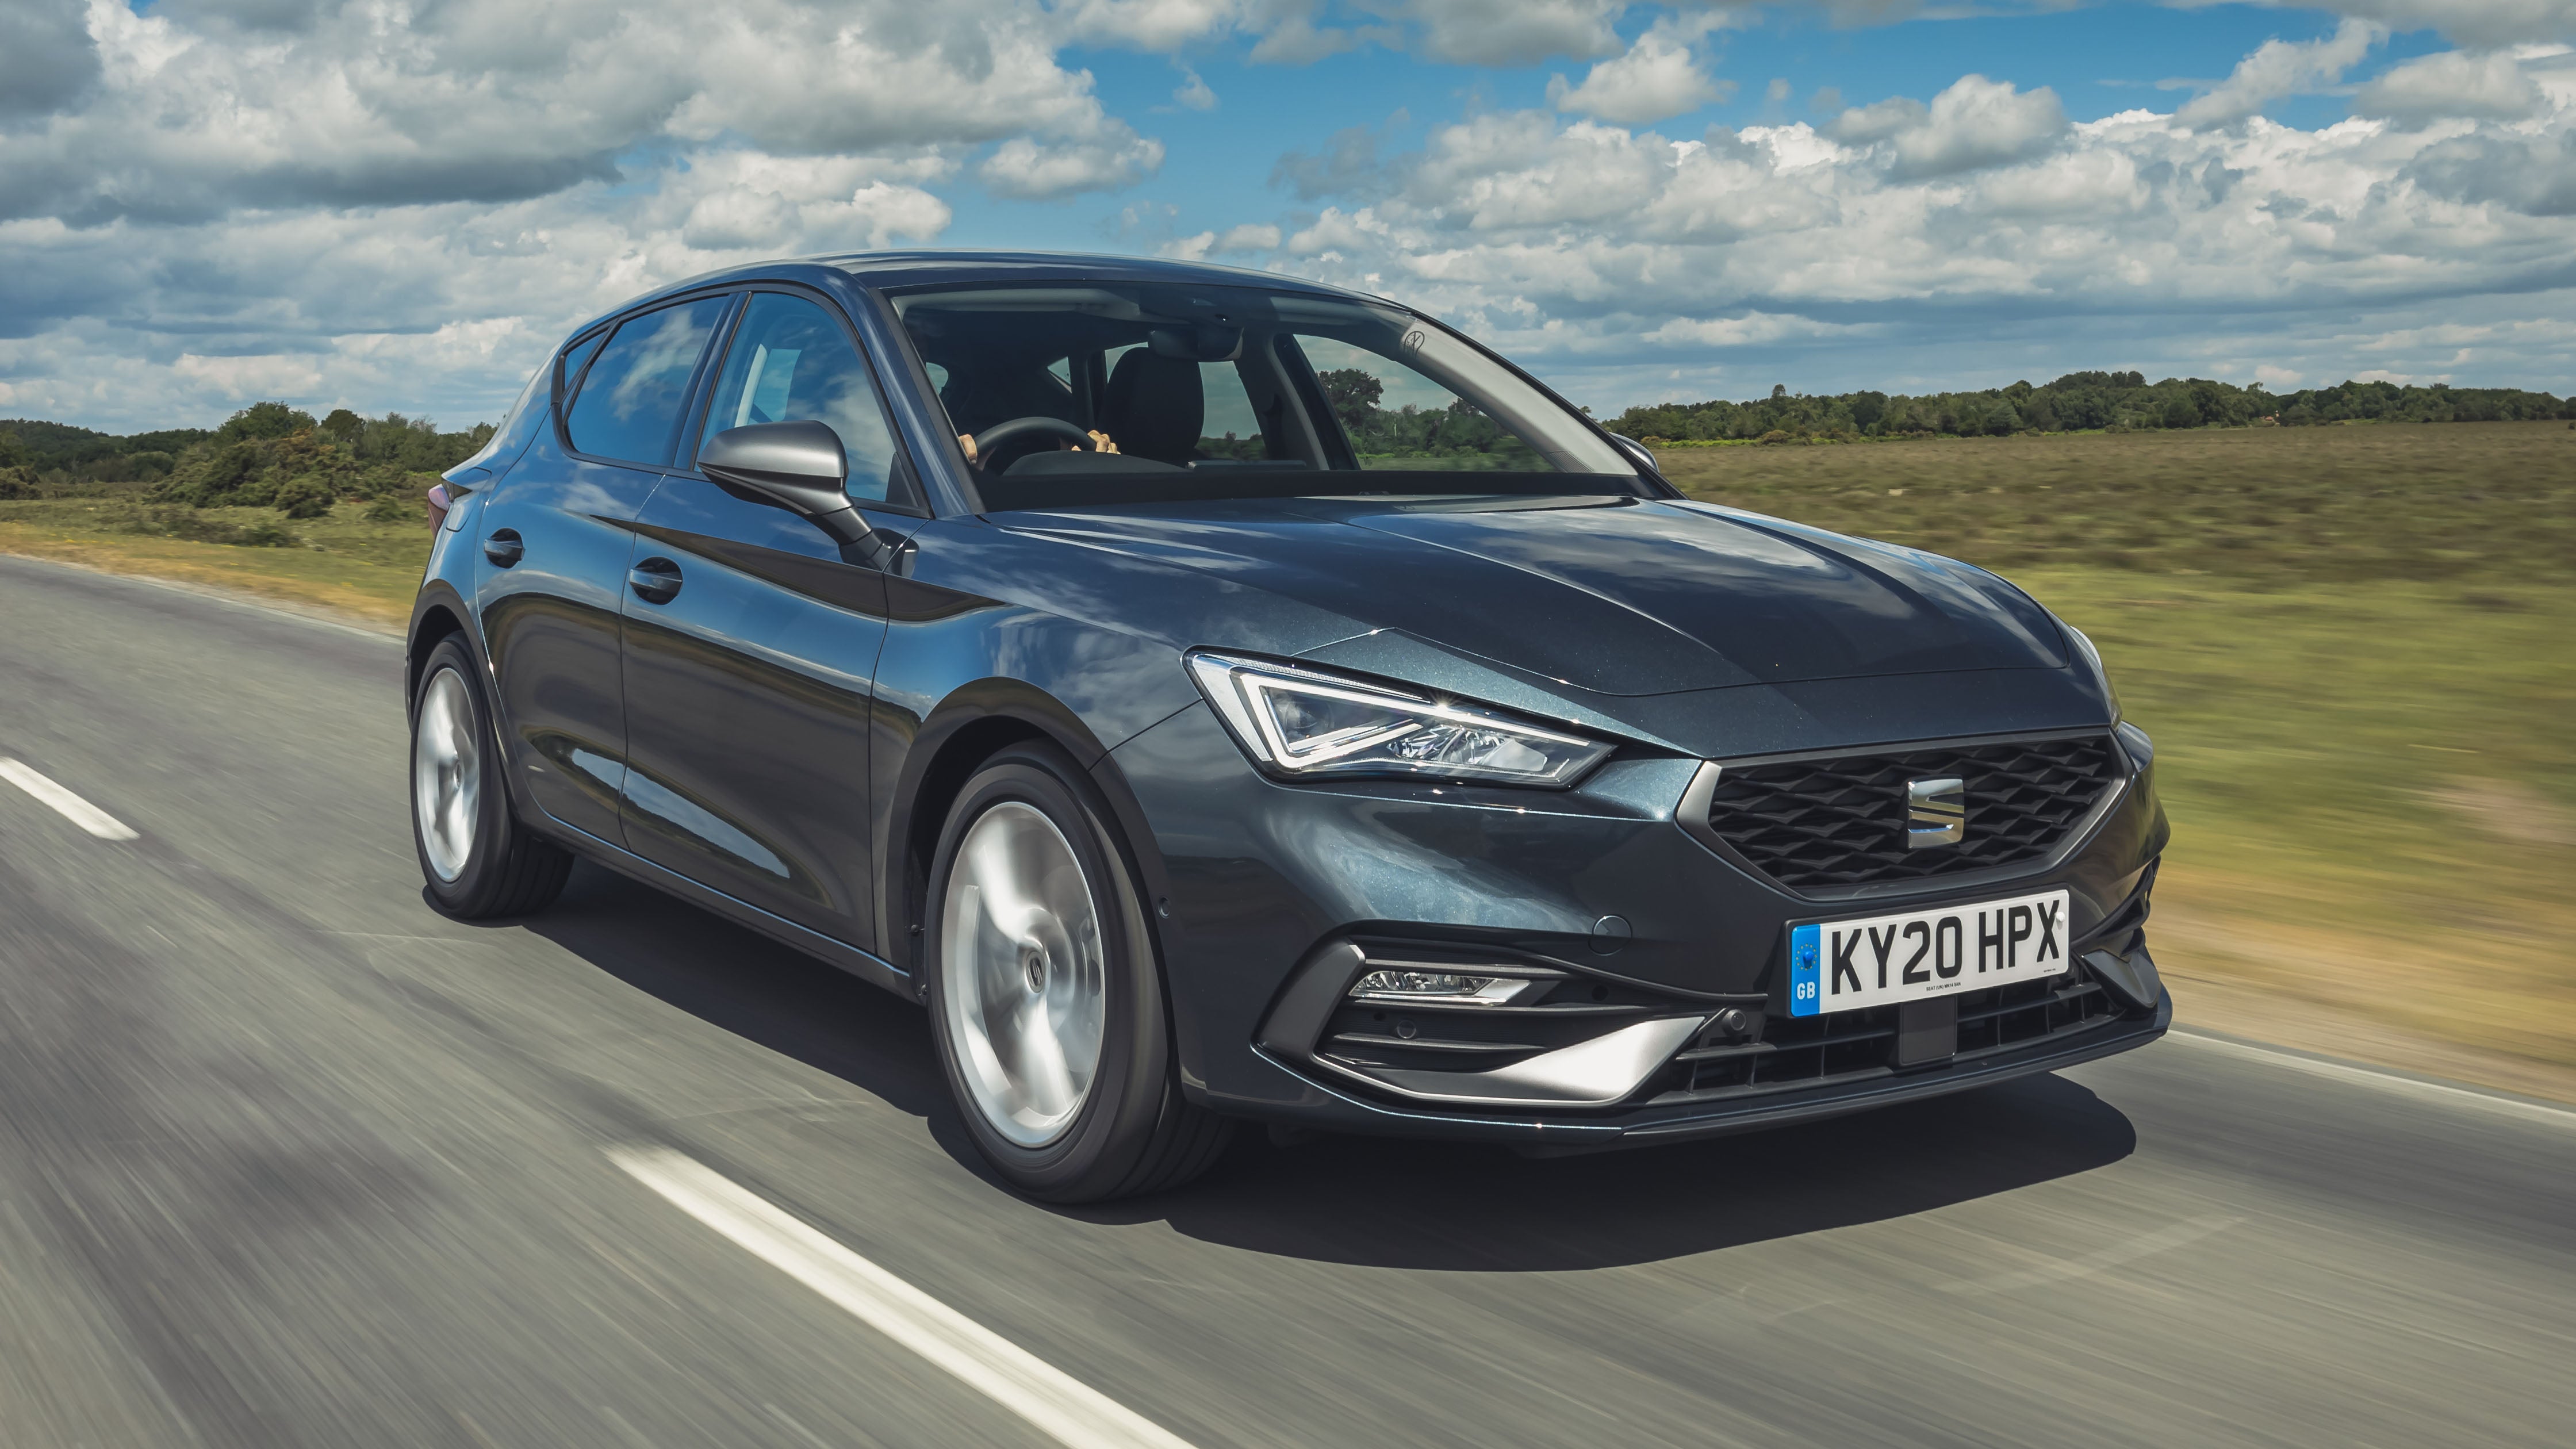 SEAT Leon Review 2023